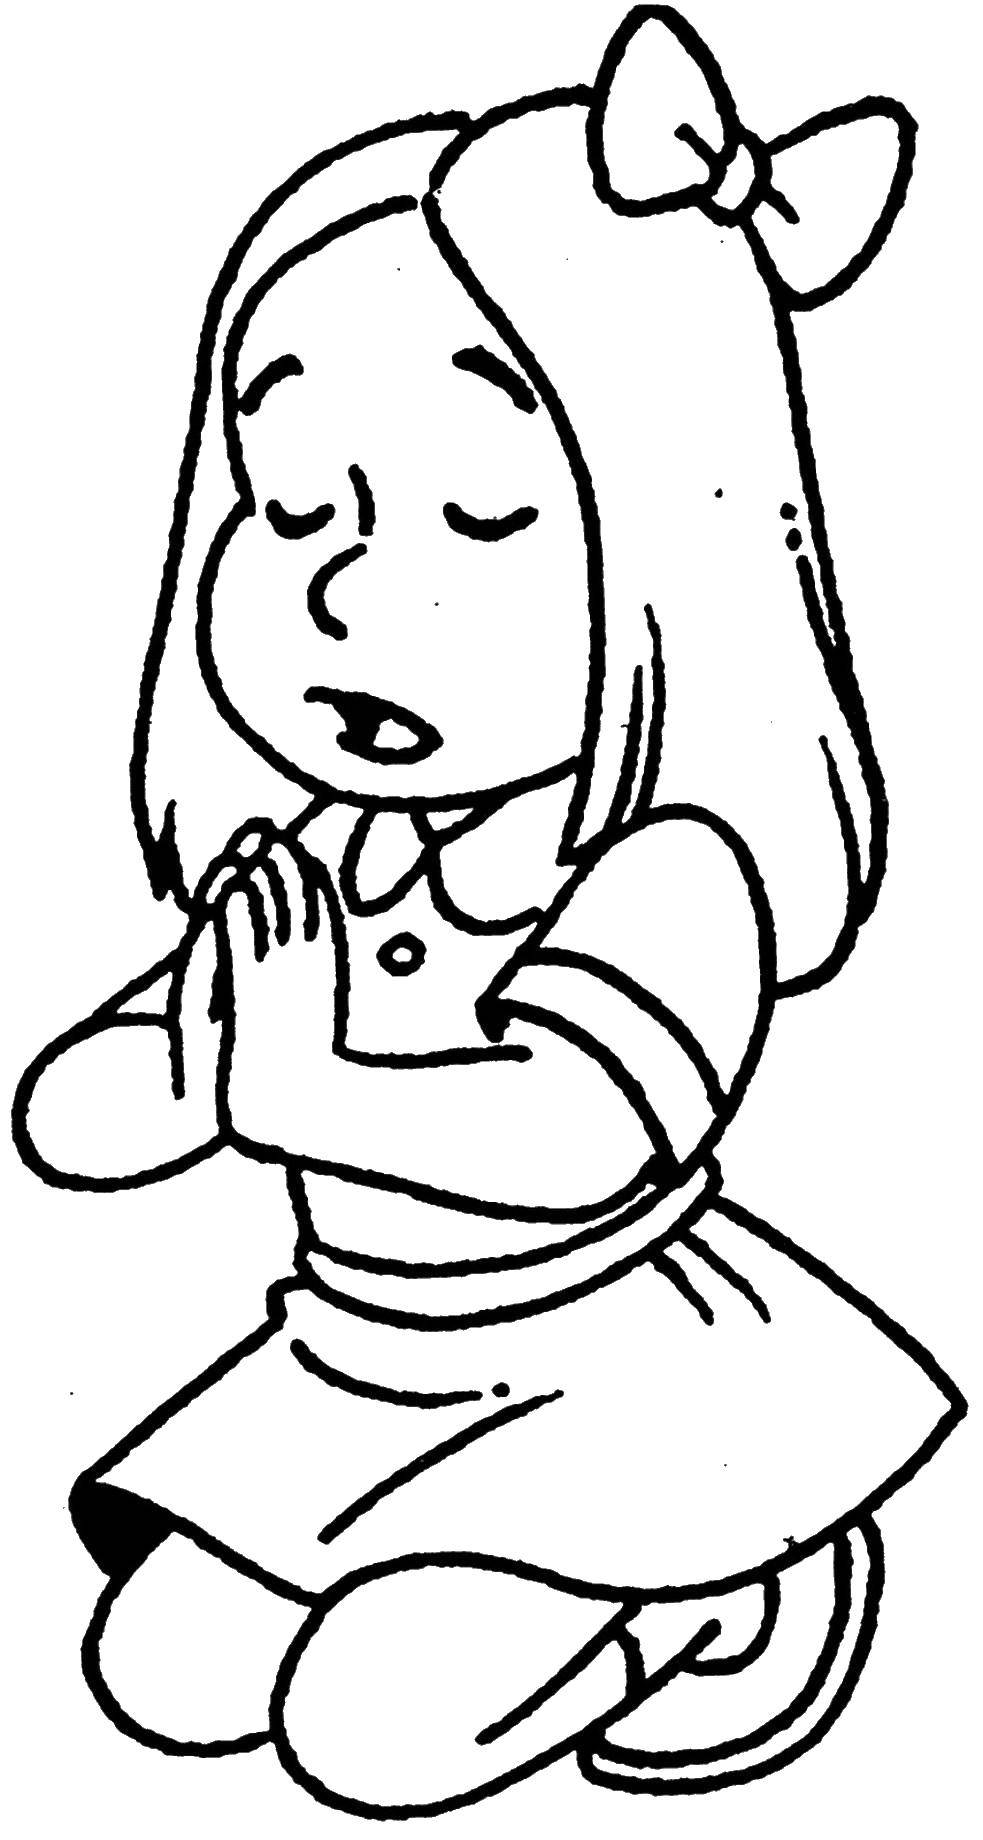 Coloring The girl in the bow praying. Category The contour of the hands and palms to cut. Tags:  praying girl.